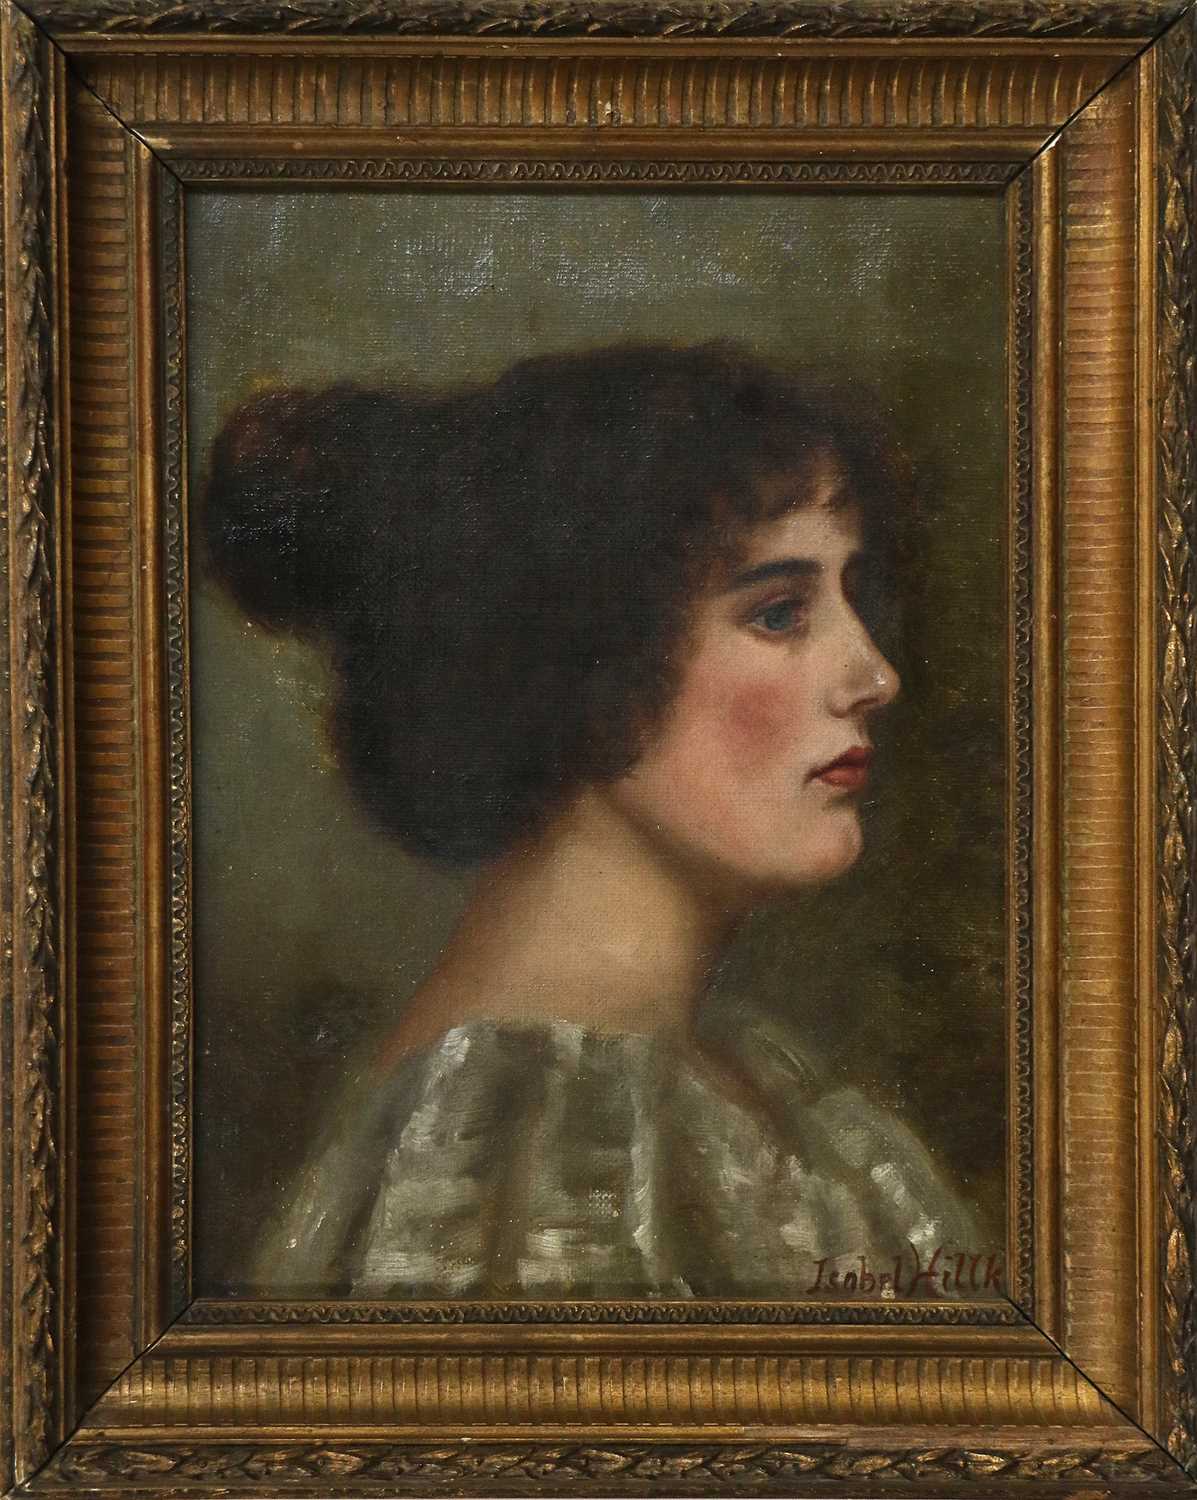 Isabel Hullk (20th Century) Potrait of an elegant lady, head and shoulders, wearing a white dress - Image 2 of 3